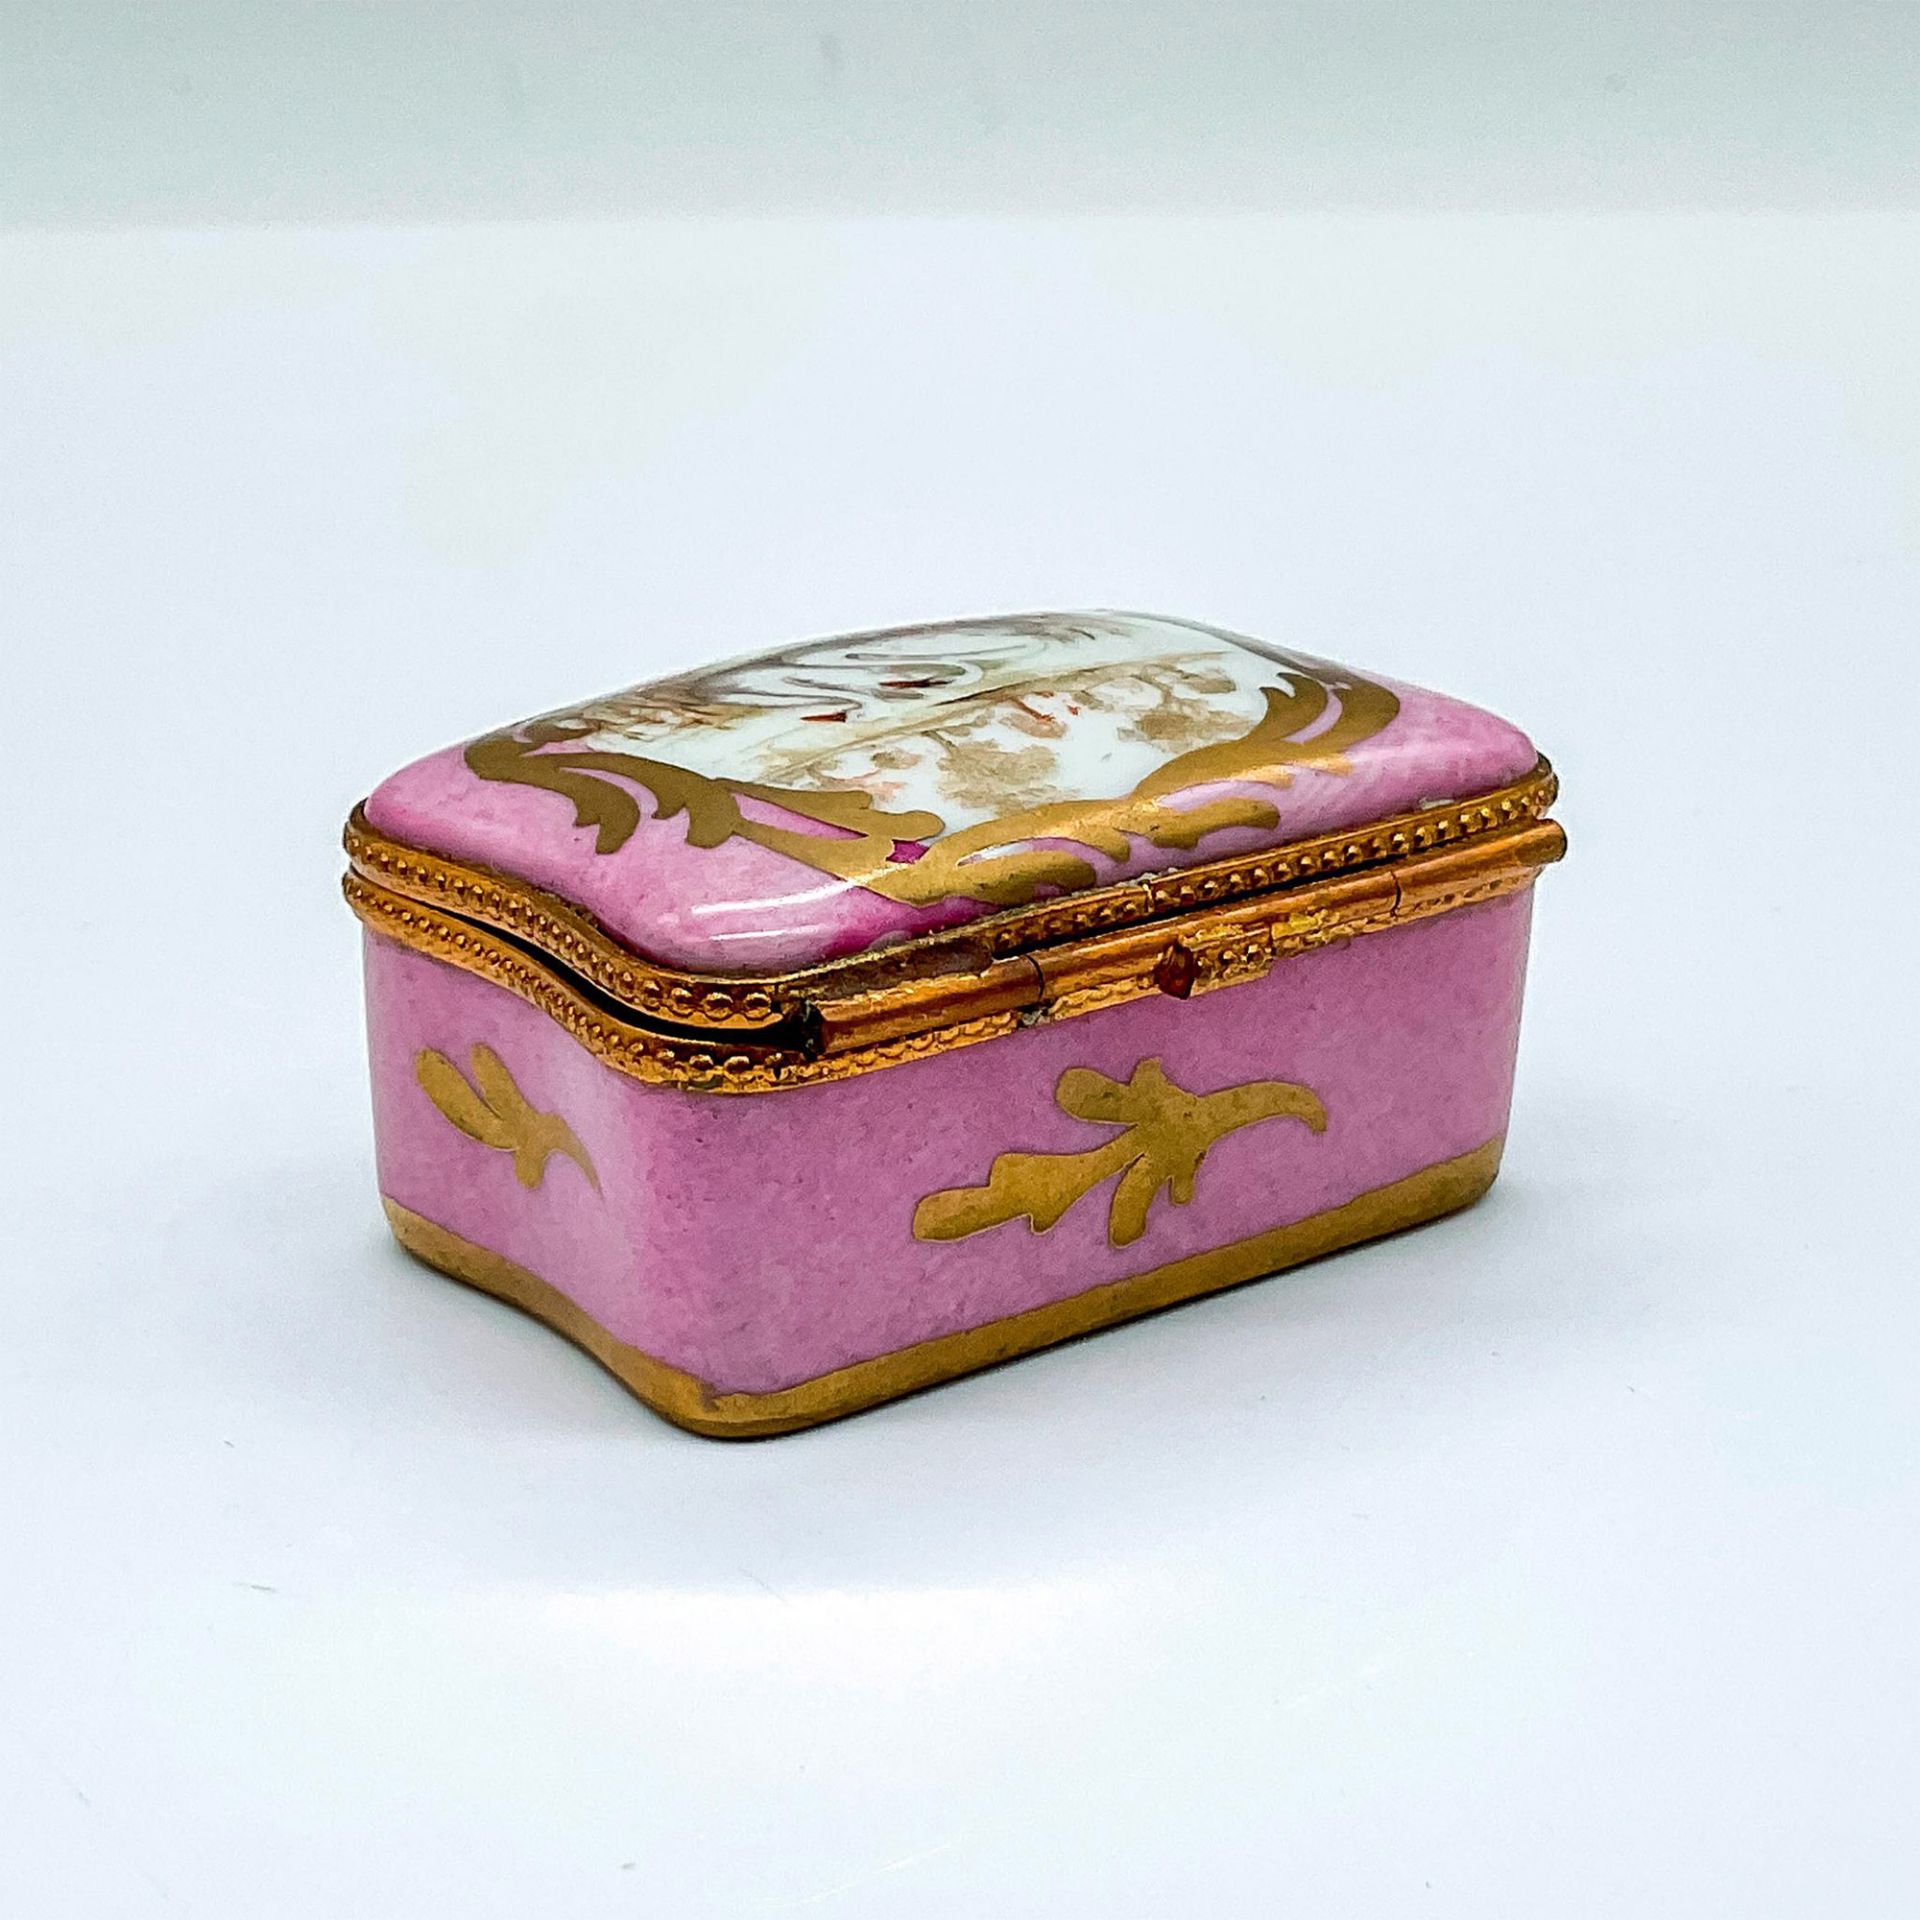 French Porcelain Limoges Swan Box - Image 2 of 5